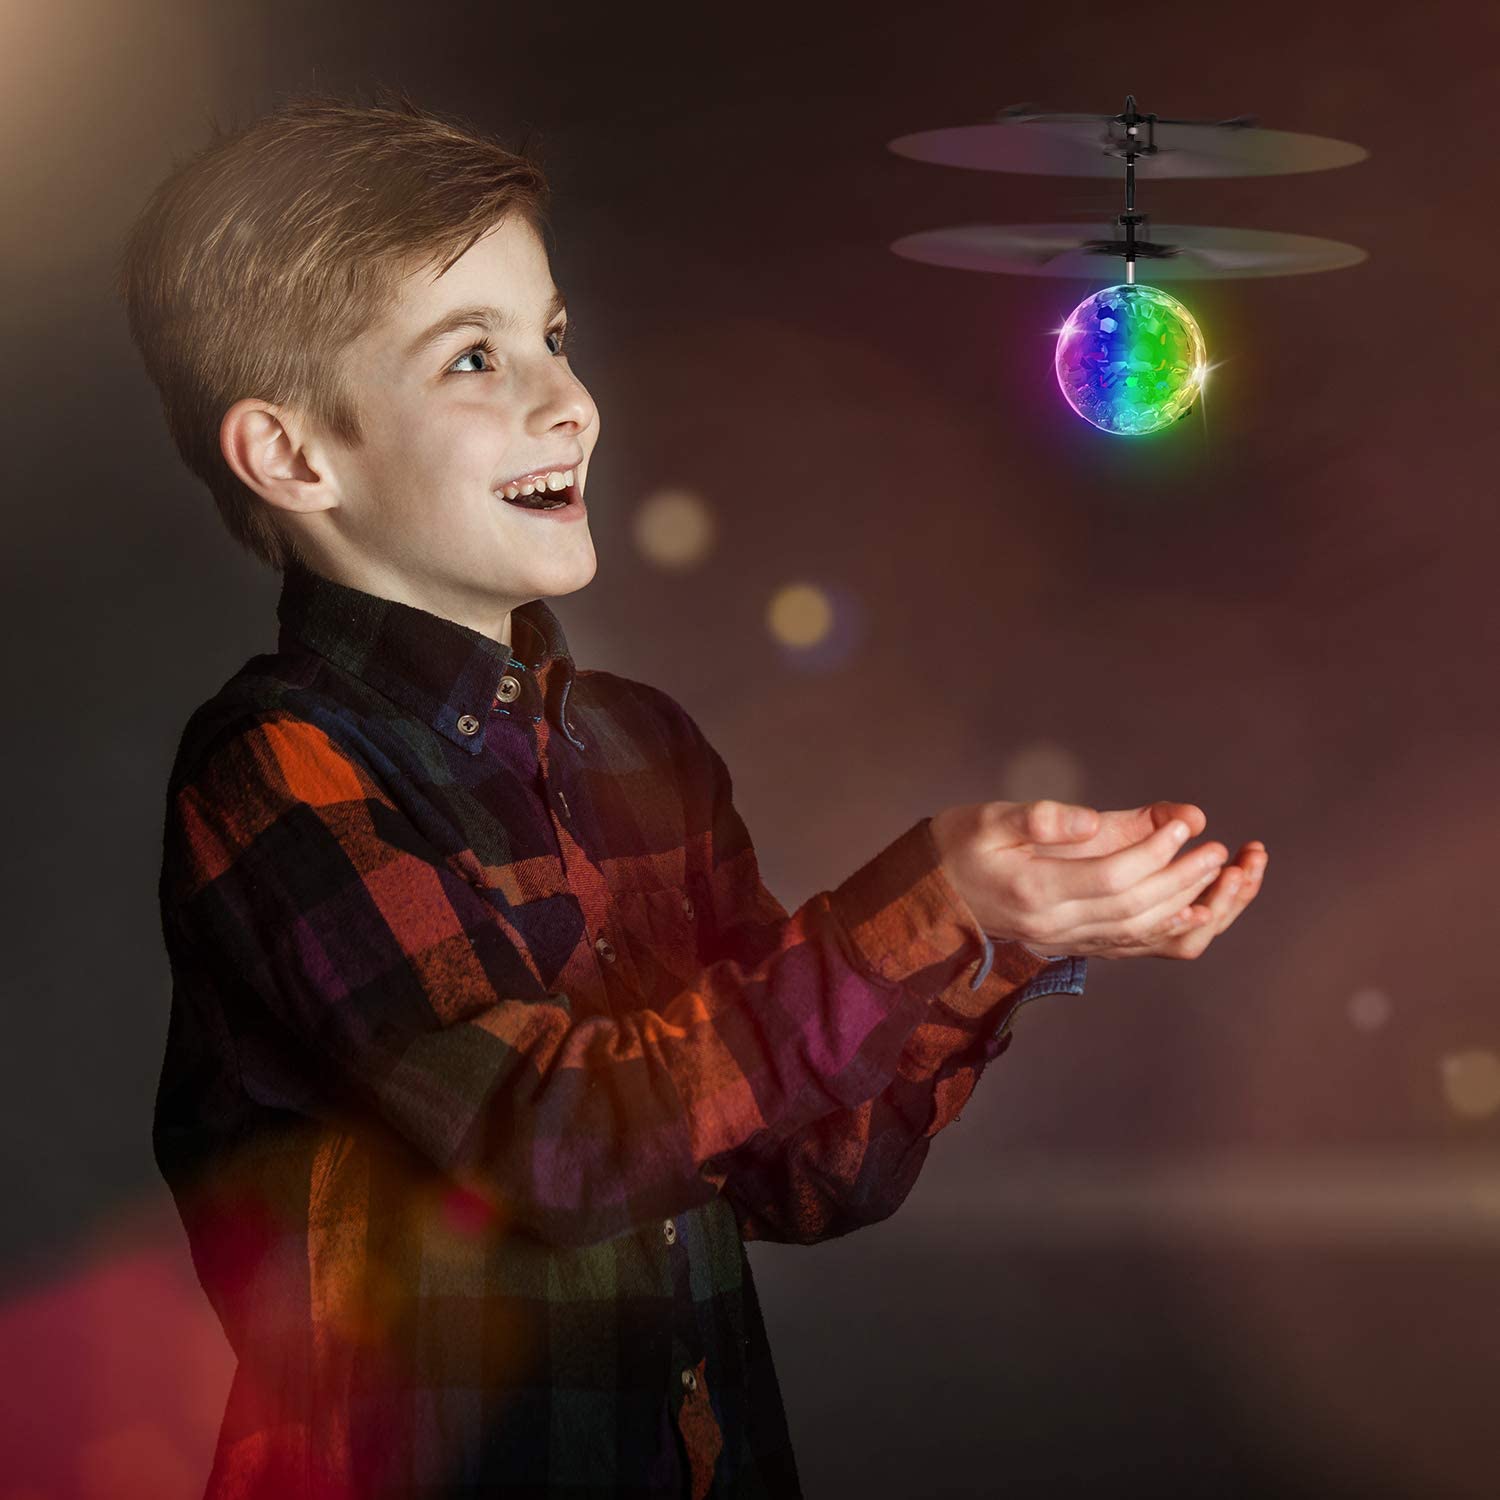 Infrared Induction RC Flying Toy Ball